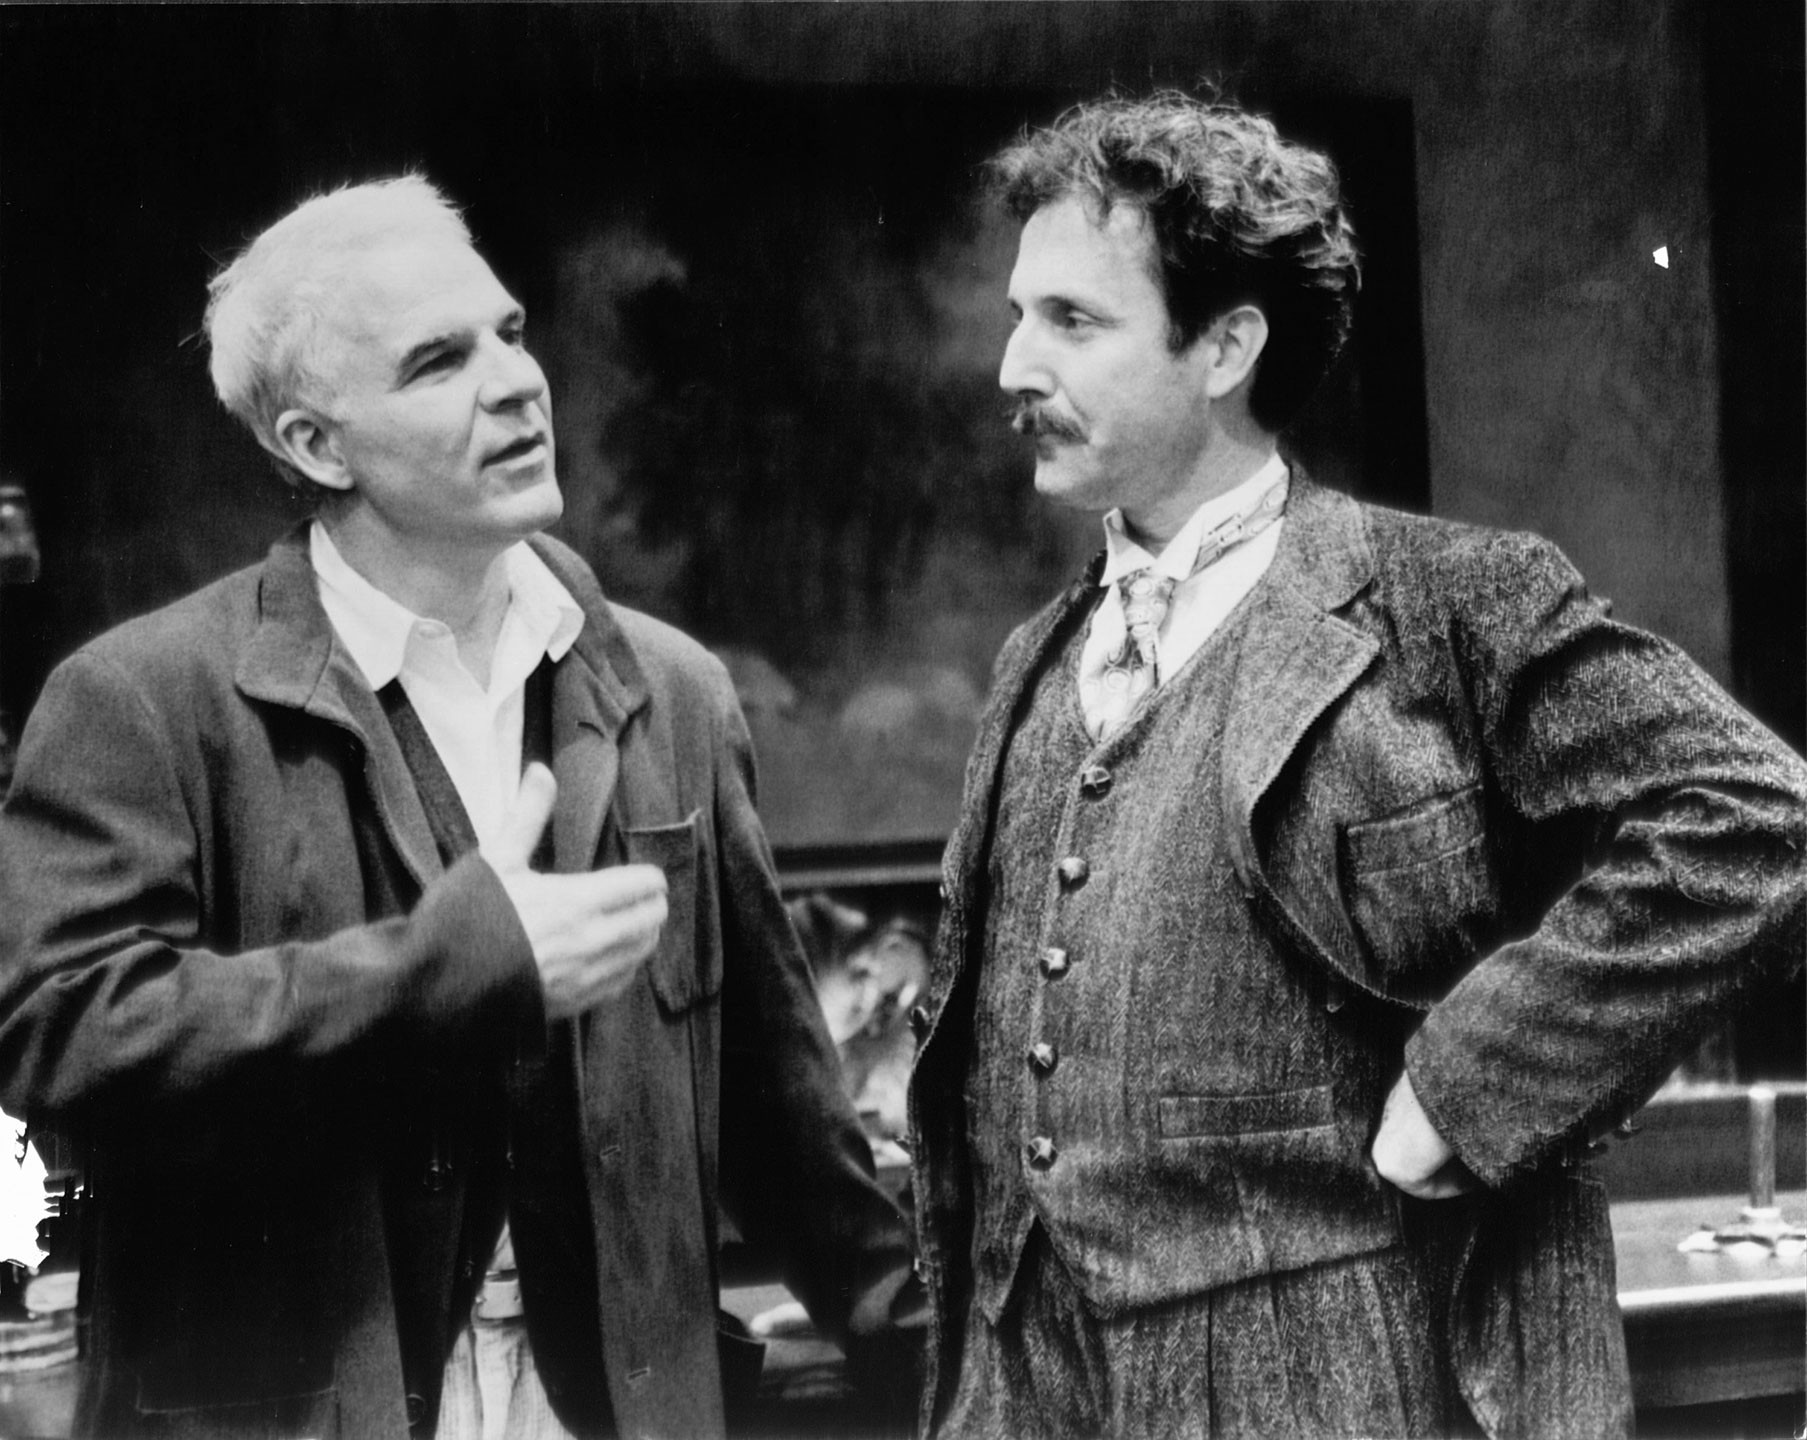 Actor/director/playwright Steve Martin speaks with actor Dan Hiatt on set at Ford's Theatre. Martin is playwright of "Picasso at the Lapin Agile" on stage at Ford's in 1998.